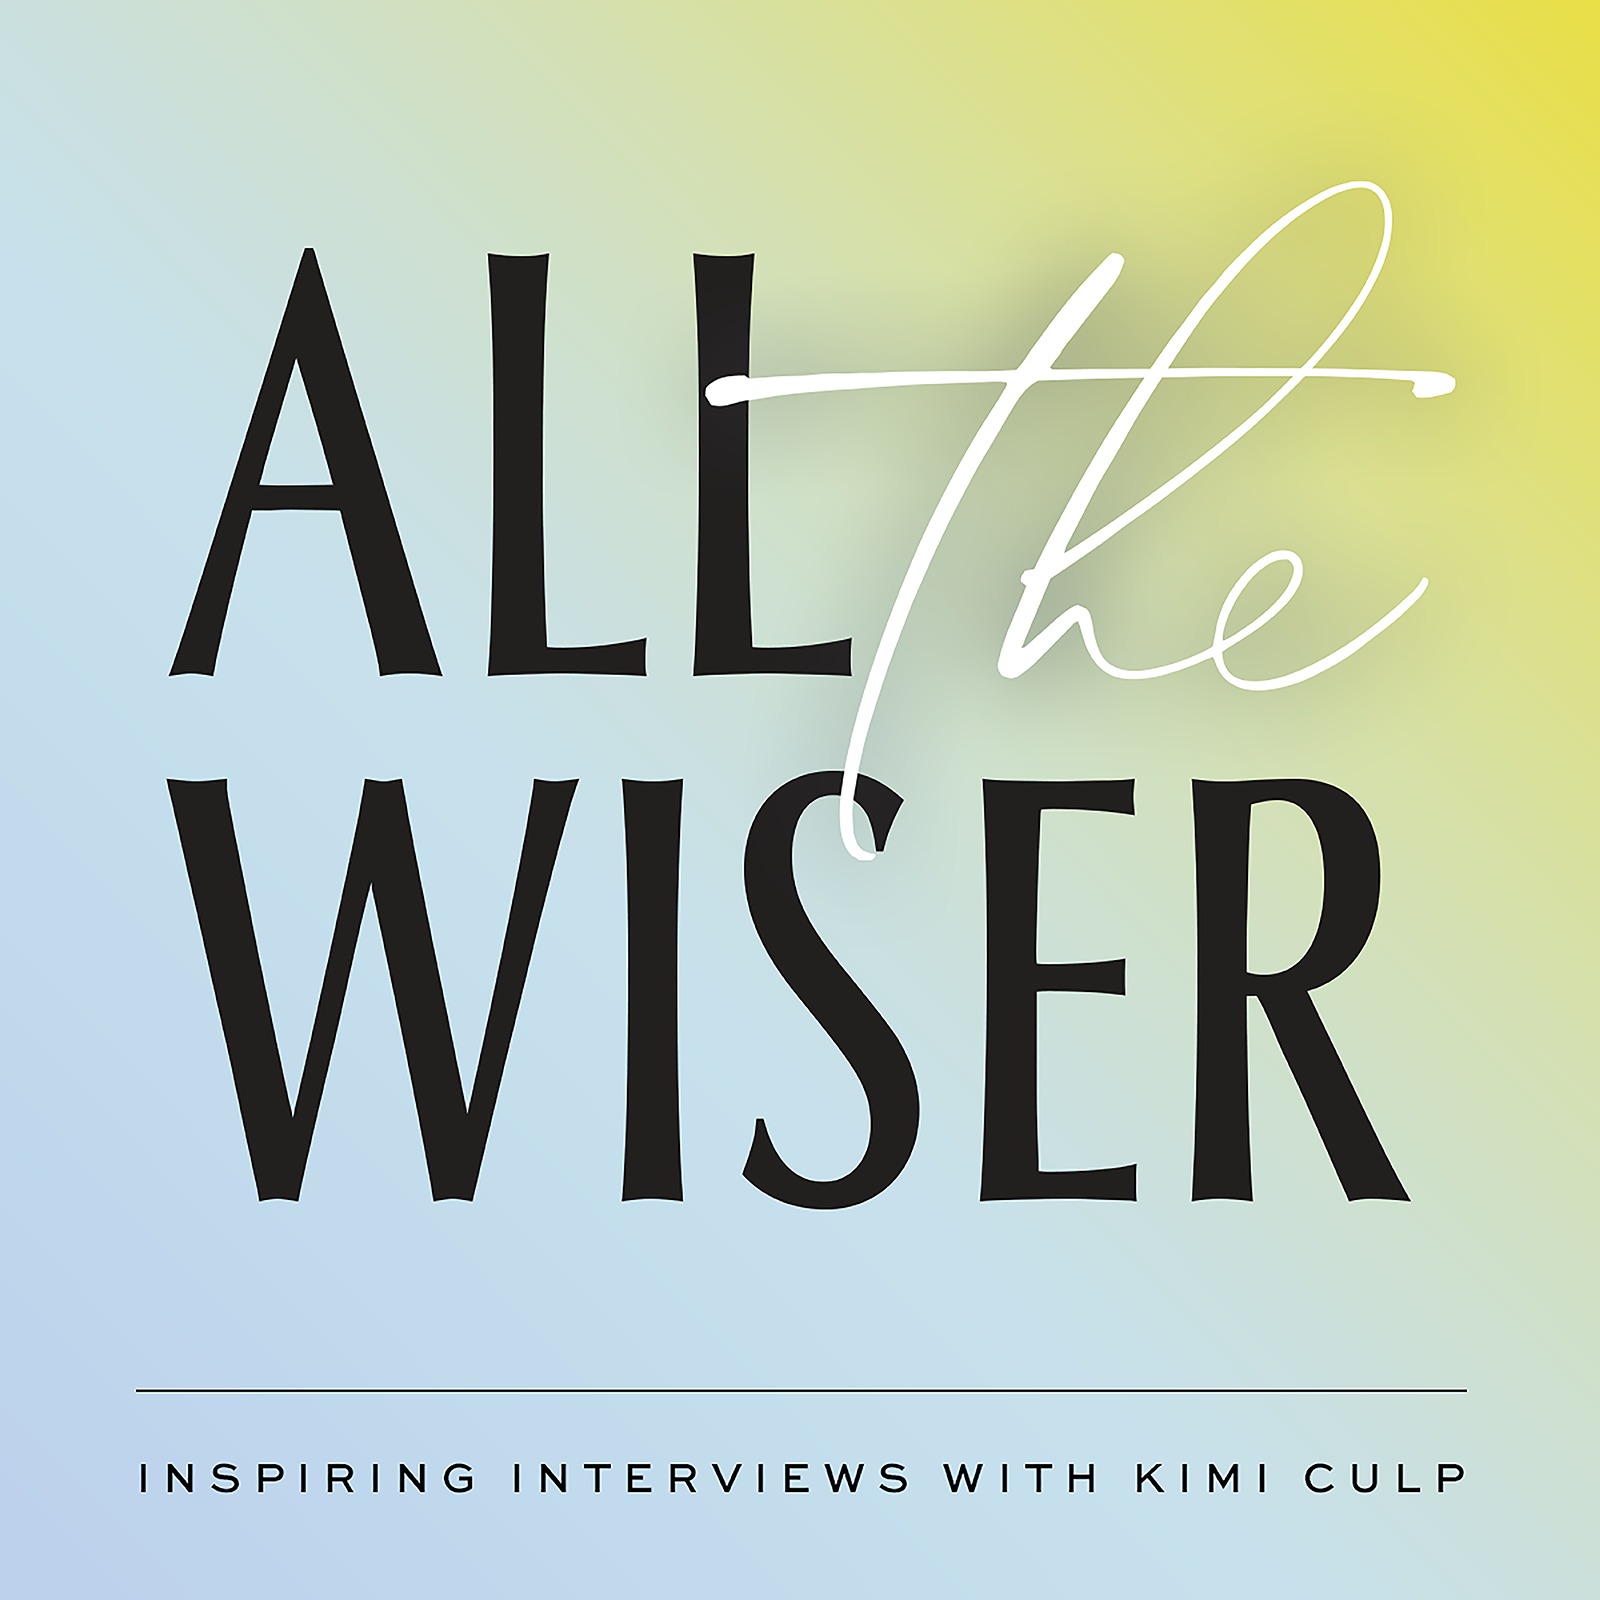 A Little Wiser: What makes religion so difficult to discuss?